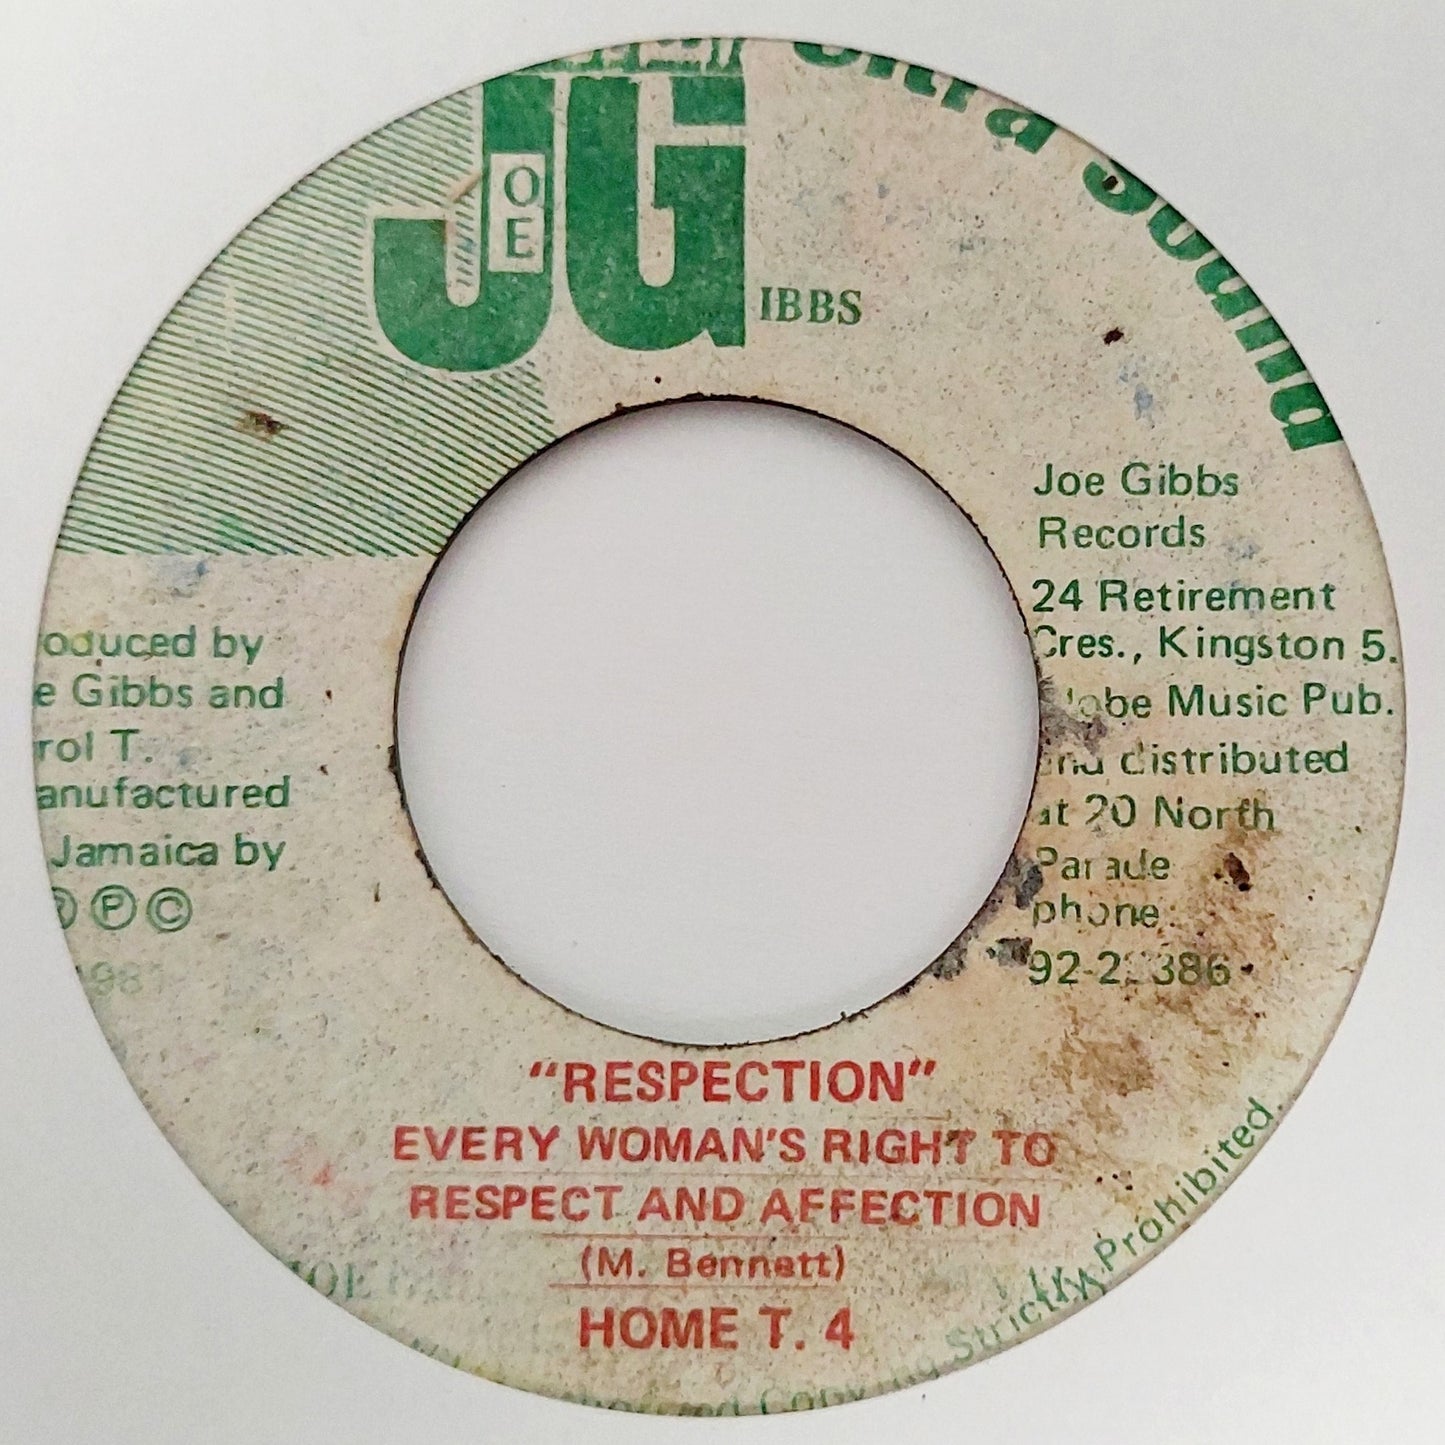 Home T 4 - "Respection" Every Woman's Right To Respect And Affection